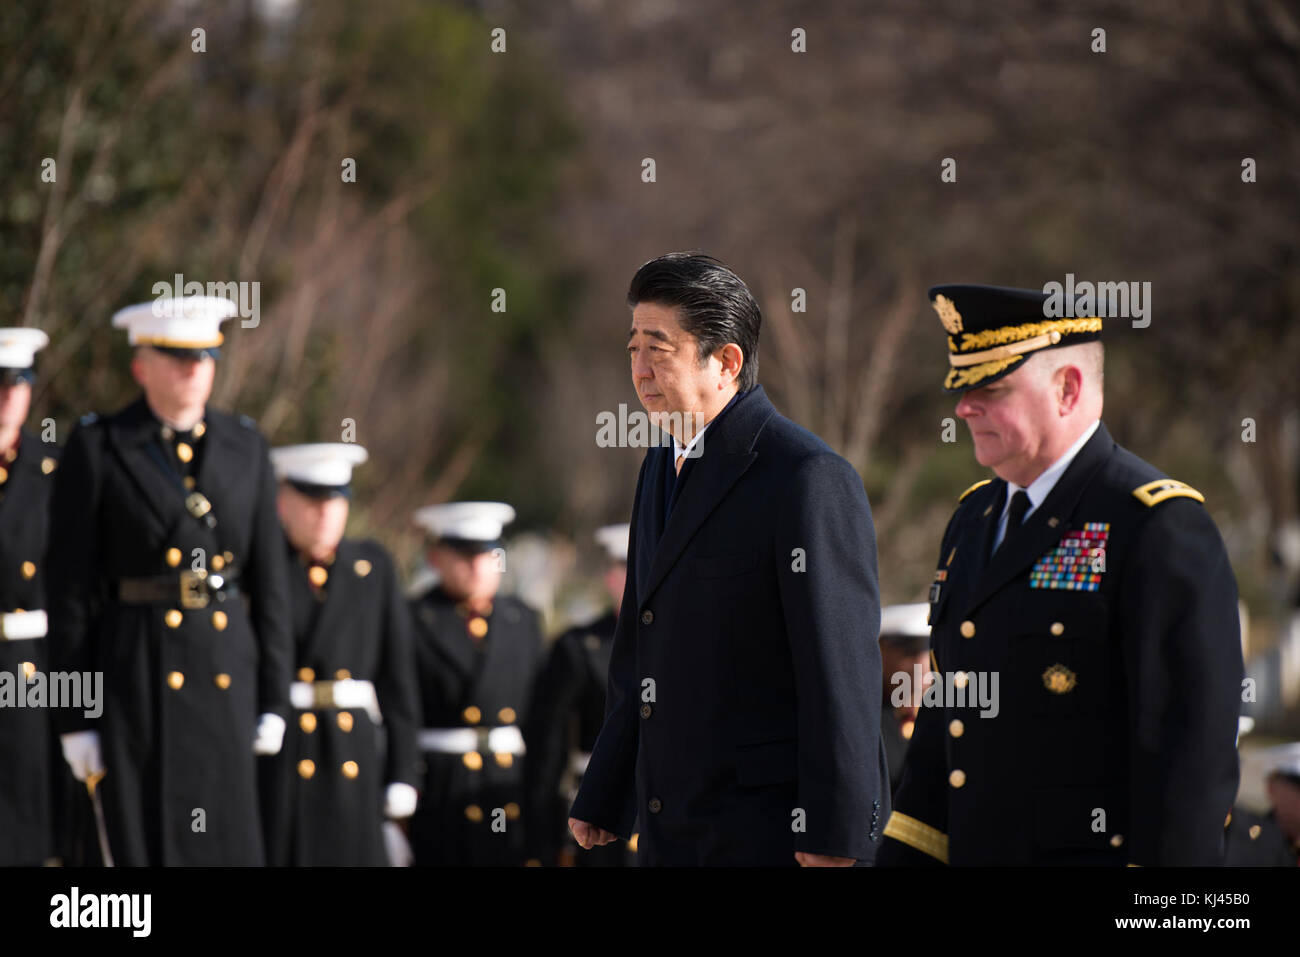 The Prime Minister of Japan lays a wreath at the Tomb of the Unknown Soldier in Arlington National Cemetery (32698262951) Stock Photo